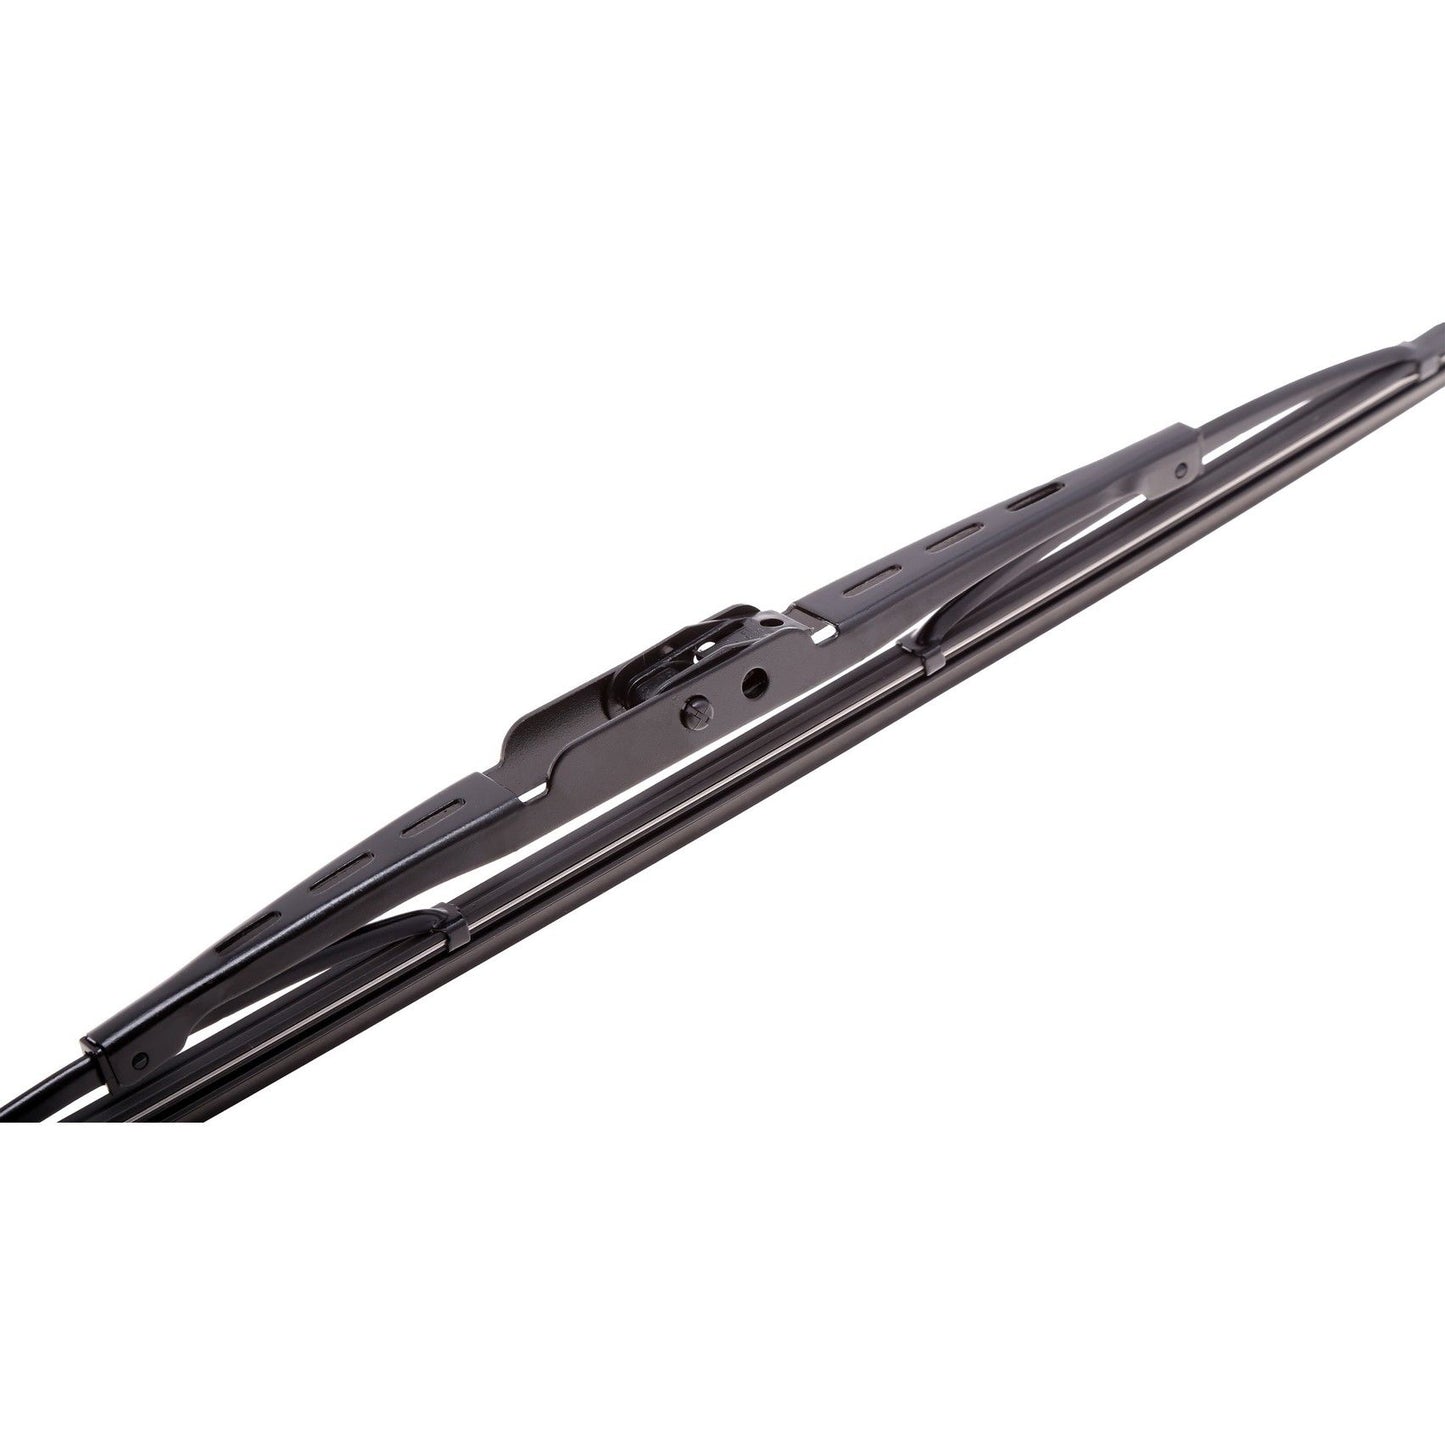 Other View of Rear Windshield Wiper Blade ANCO 31-13